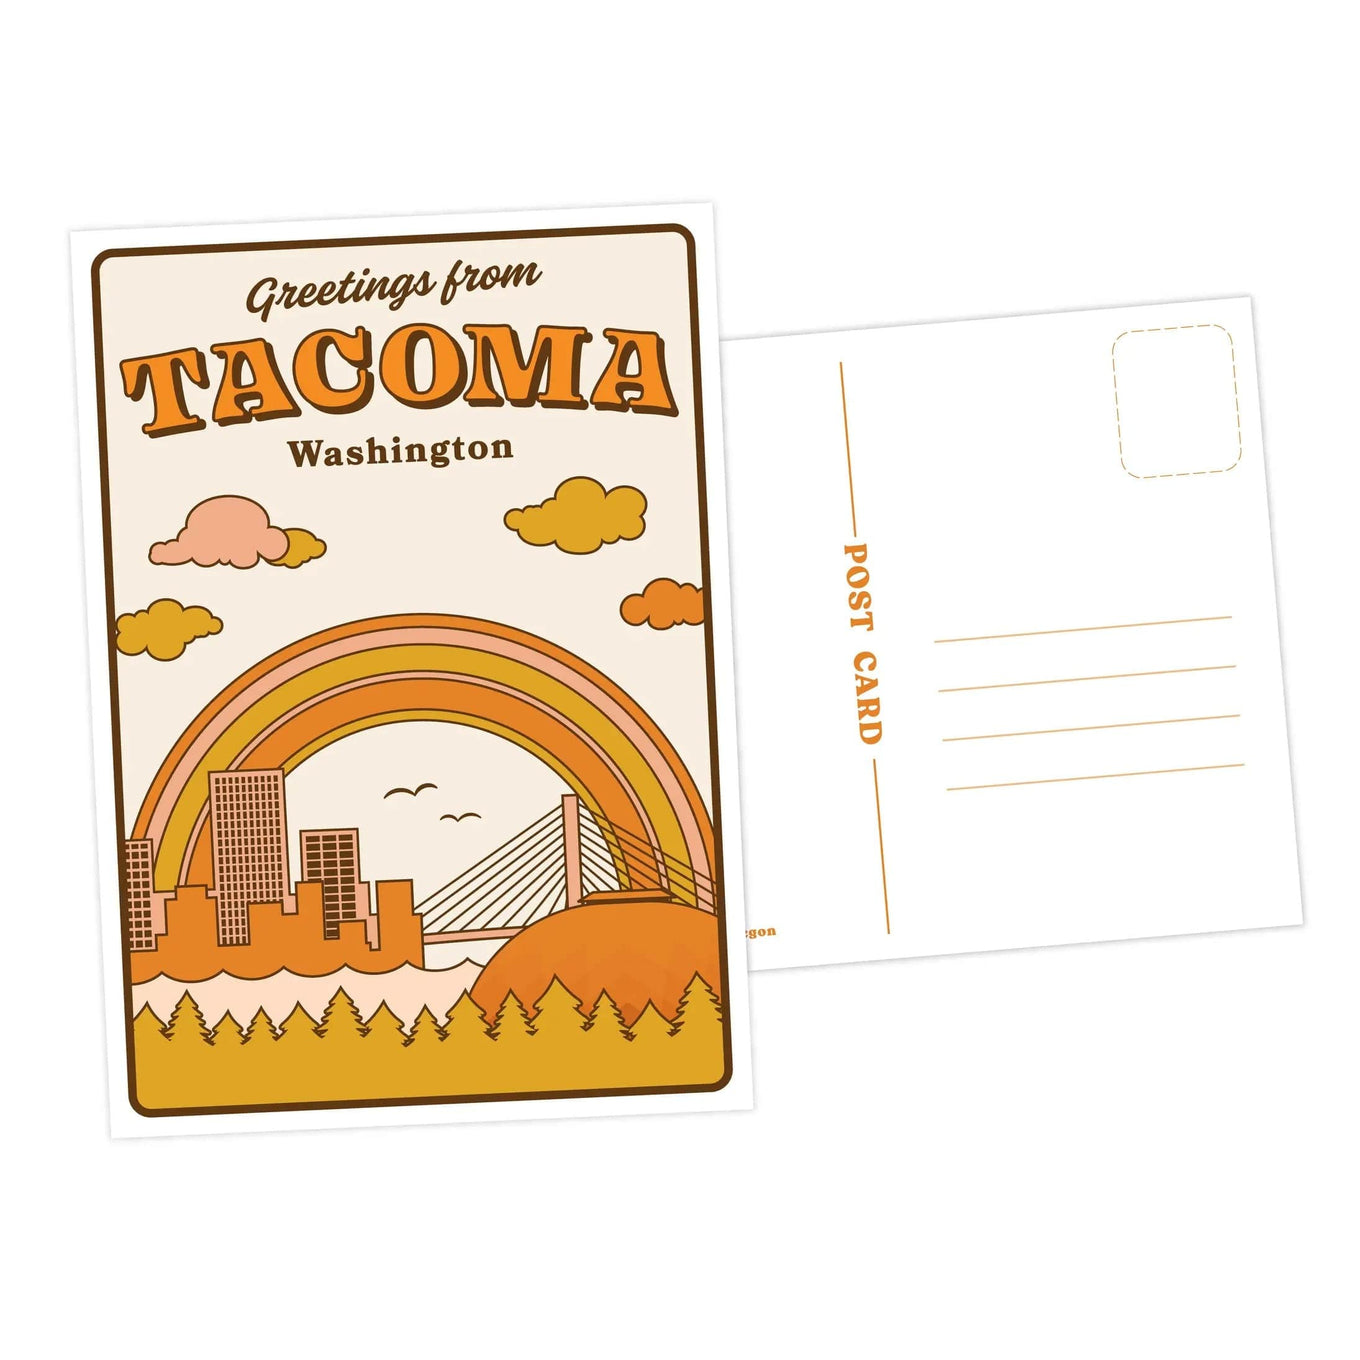 'Greetings from Tacoma" postcard